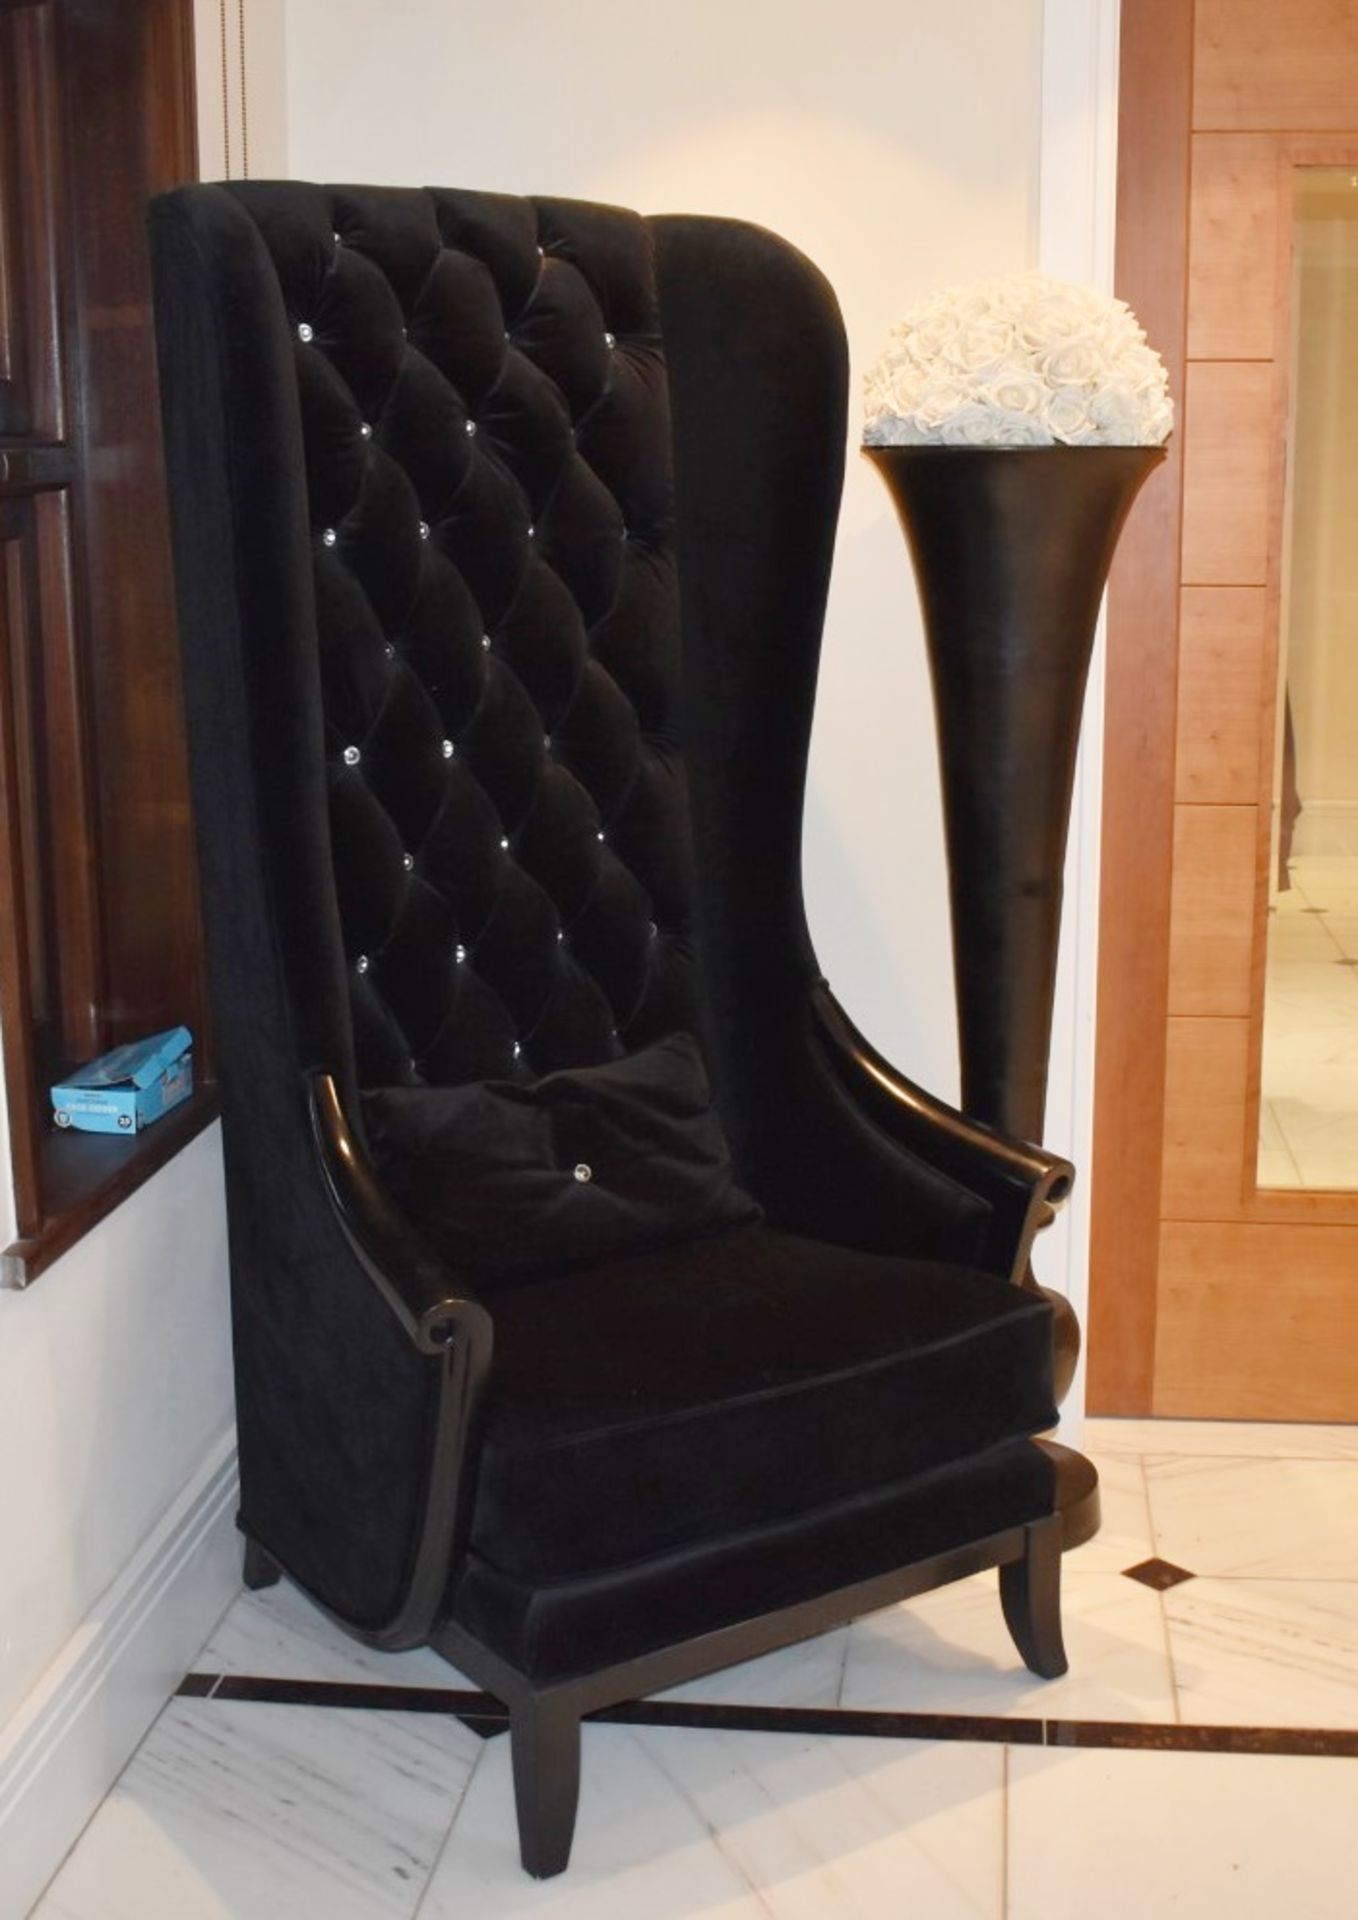 1 x Chesterfield Style Tall Wingback Armchair Upholstering in Black Velvet With Faux Crystal Studs - Image 3 of 7